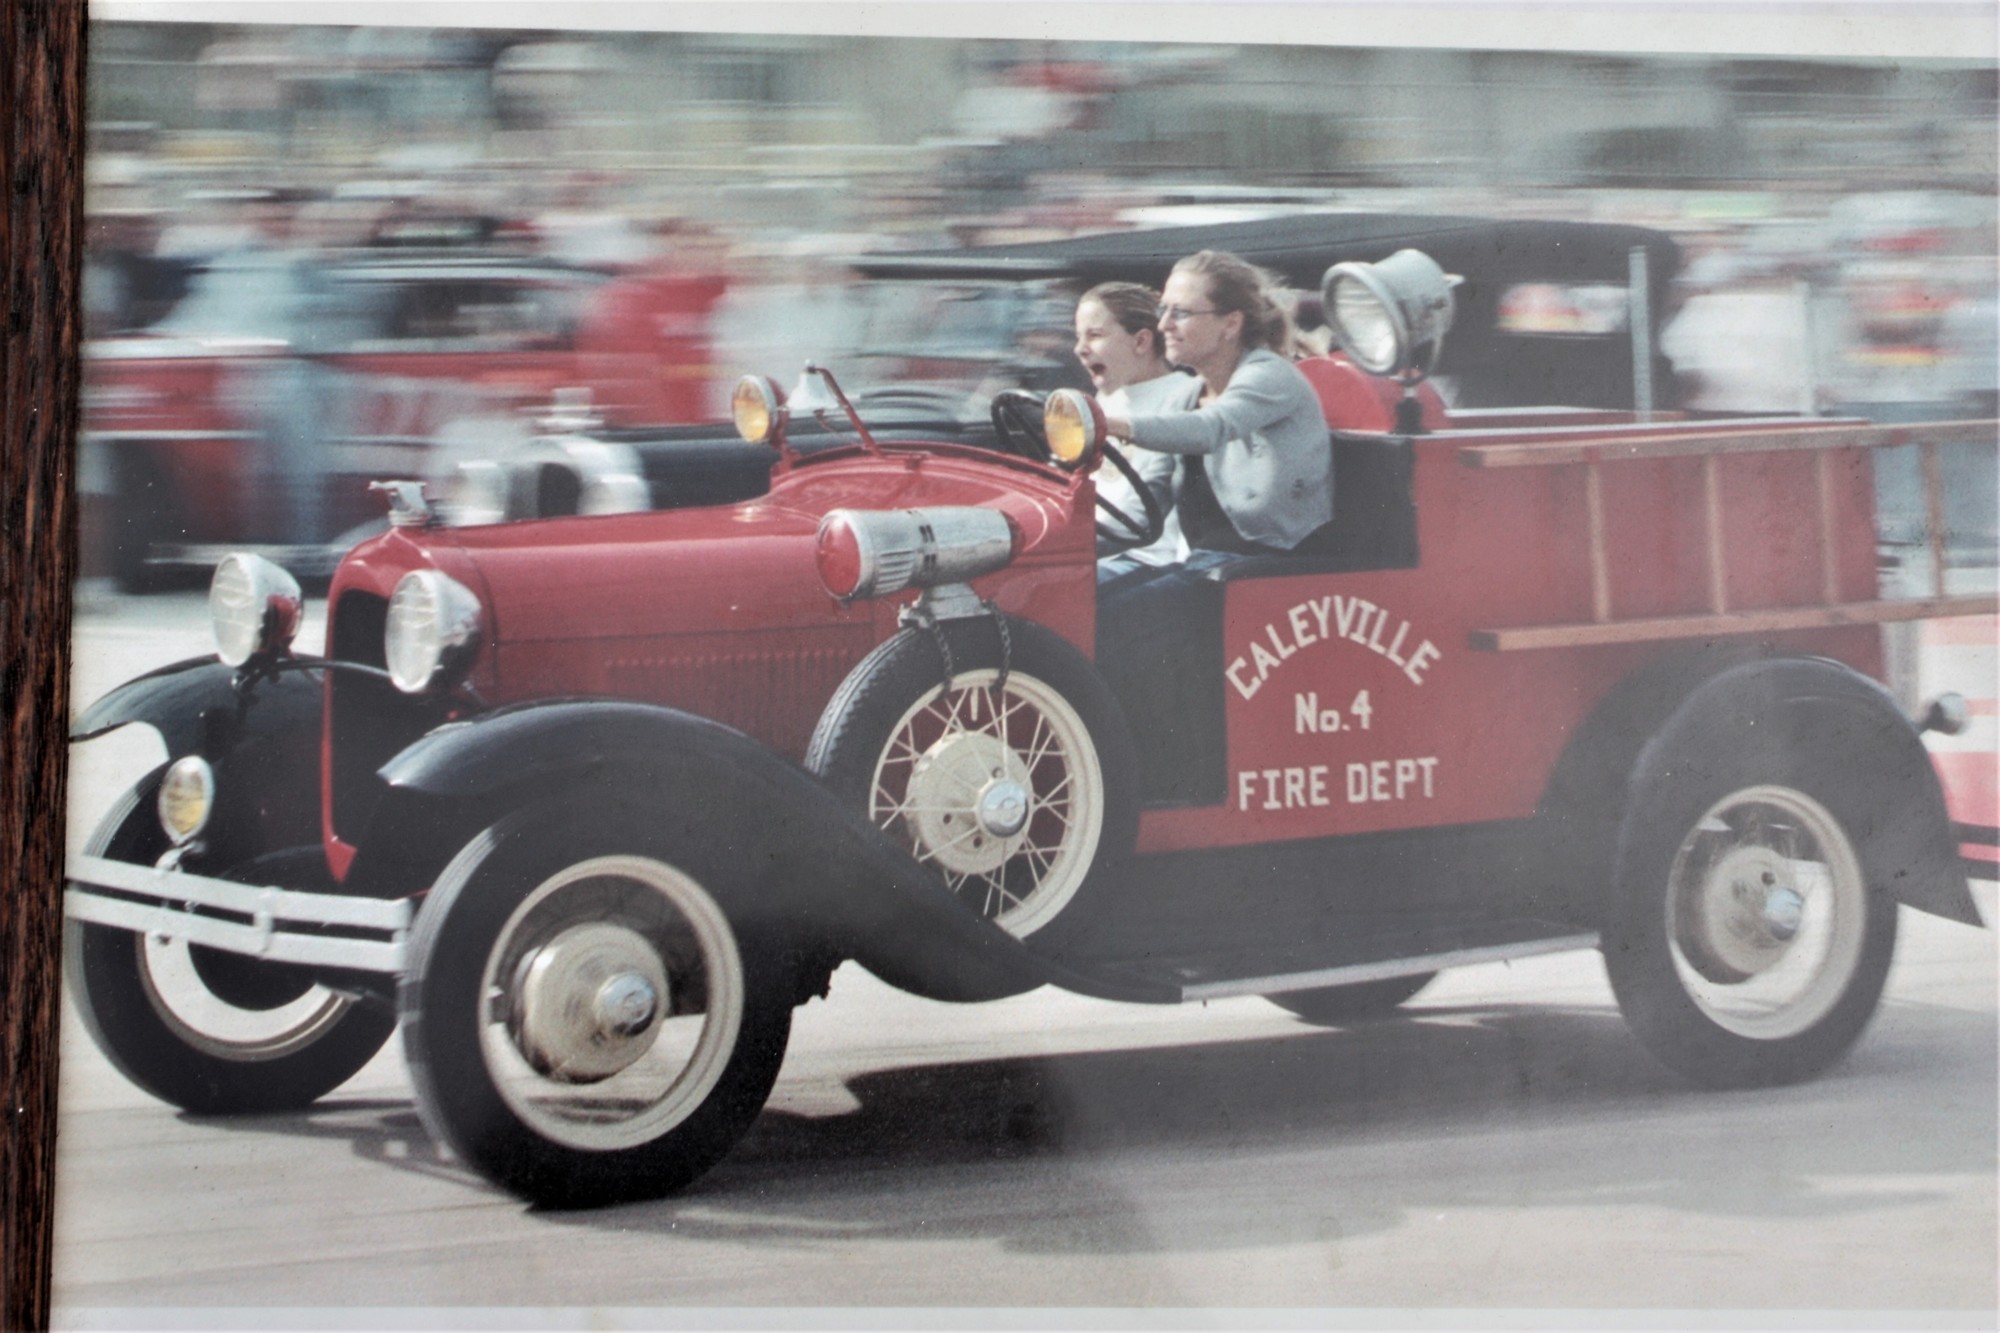 Caley Hayes rides in a firetruck built for her by her grandfather in 2000. Driving is her aunt, Kellie Pike. Courtesy photo